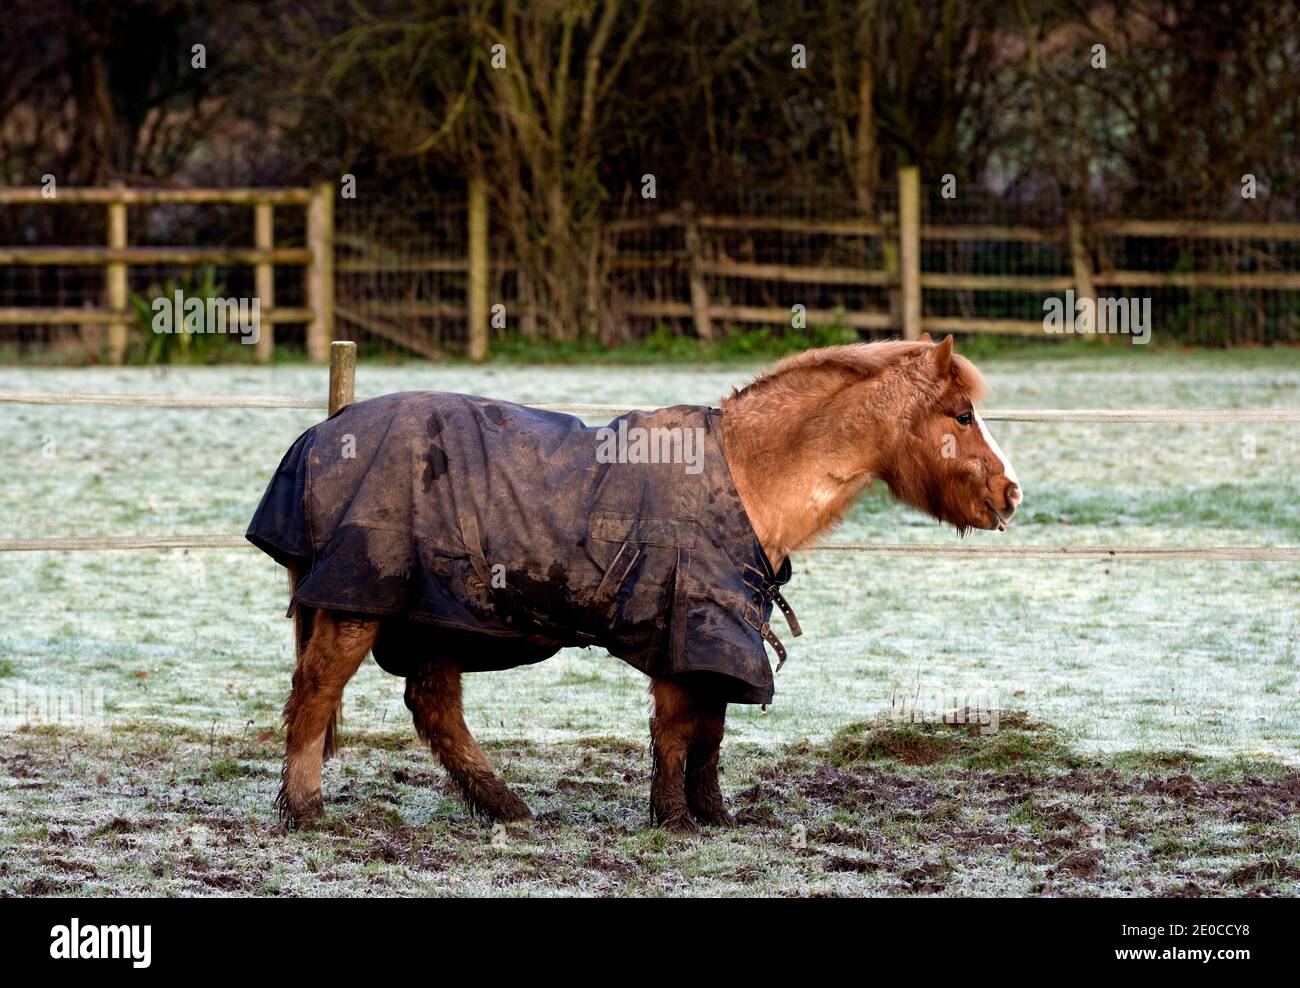 A horse wearing a rug in winter, Warwickshire, UK Stock Photo